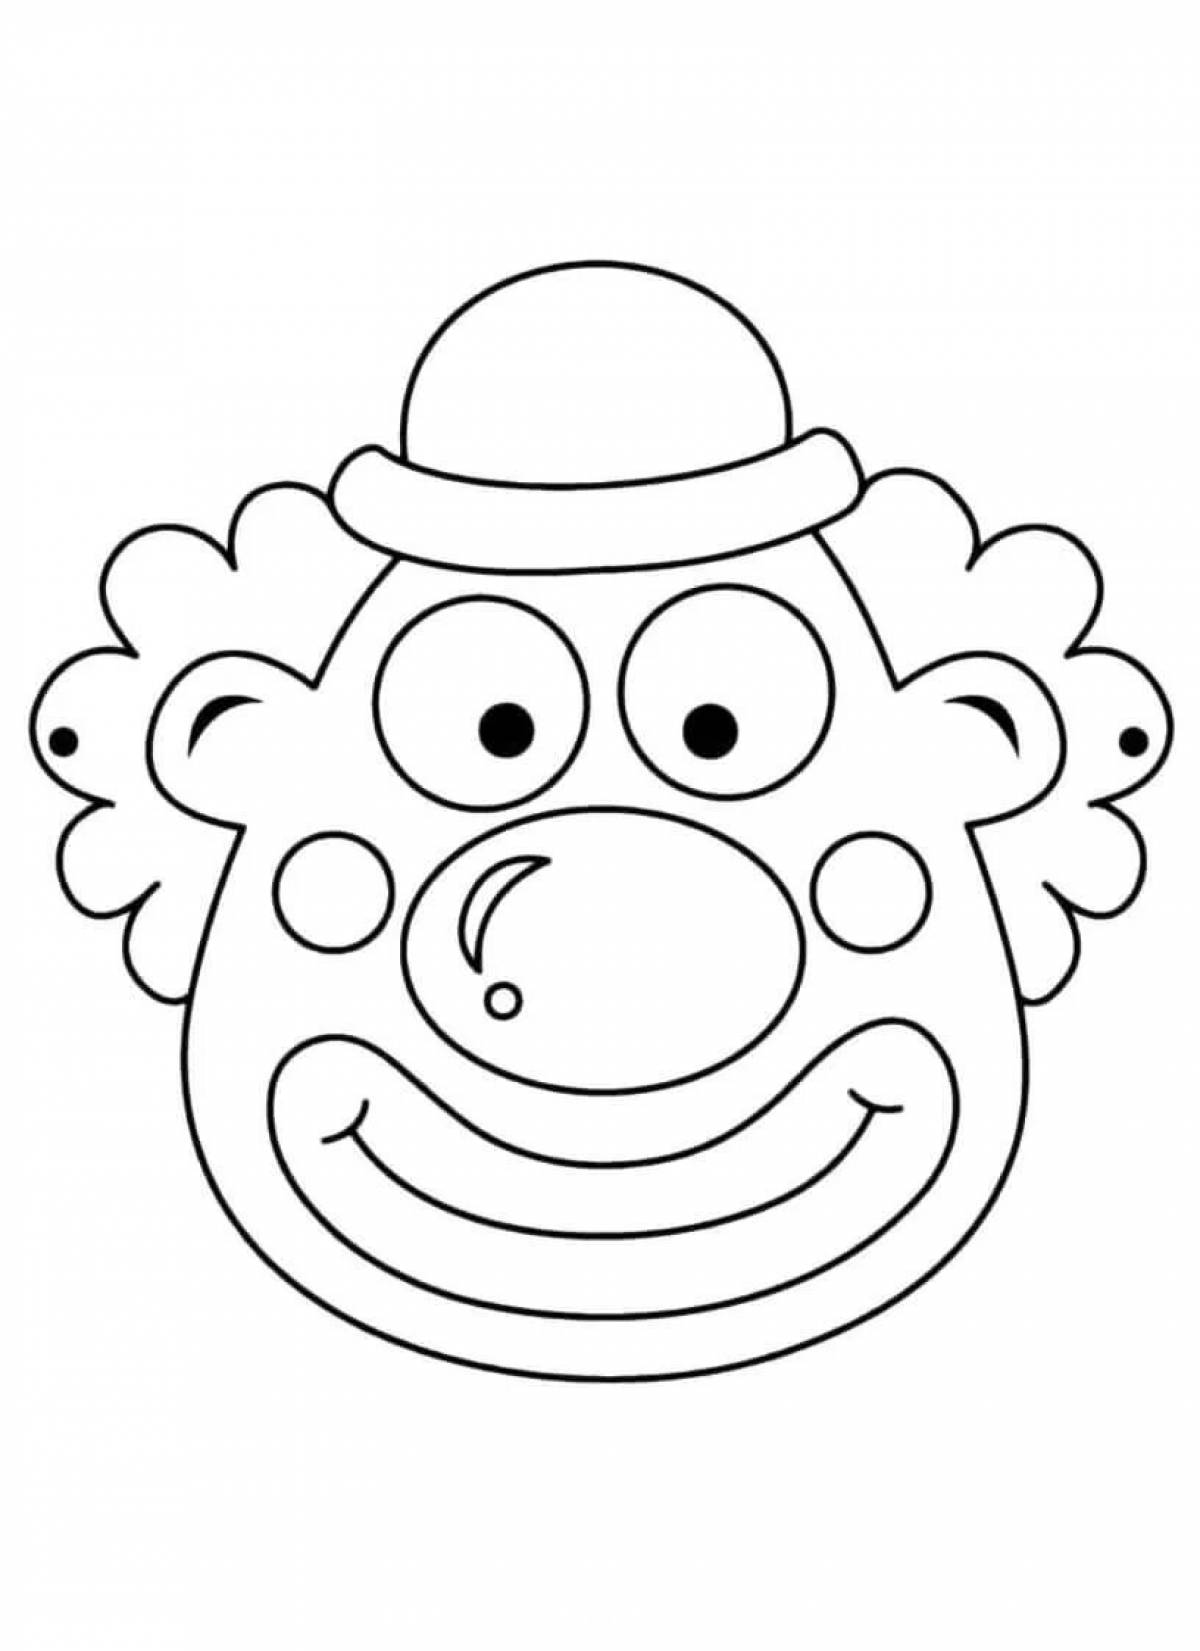 Glitter clown mask coloring page